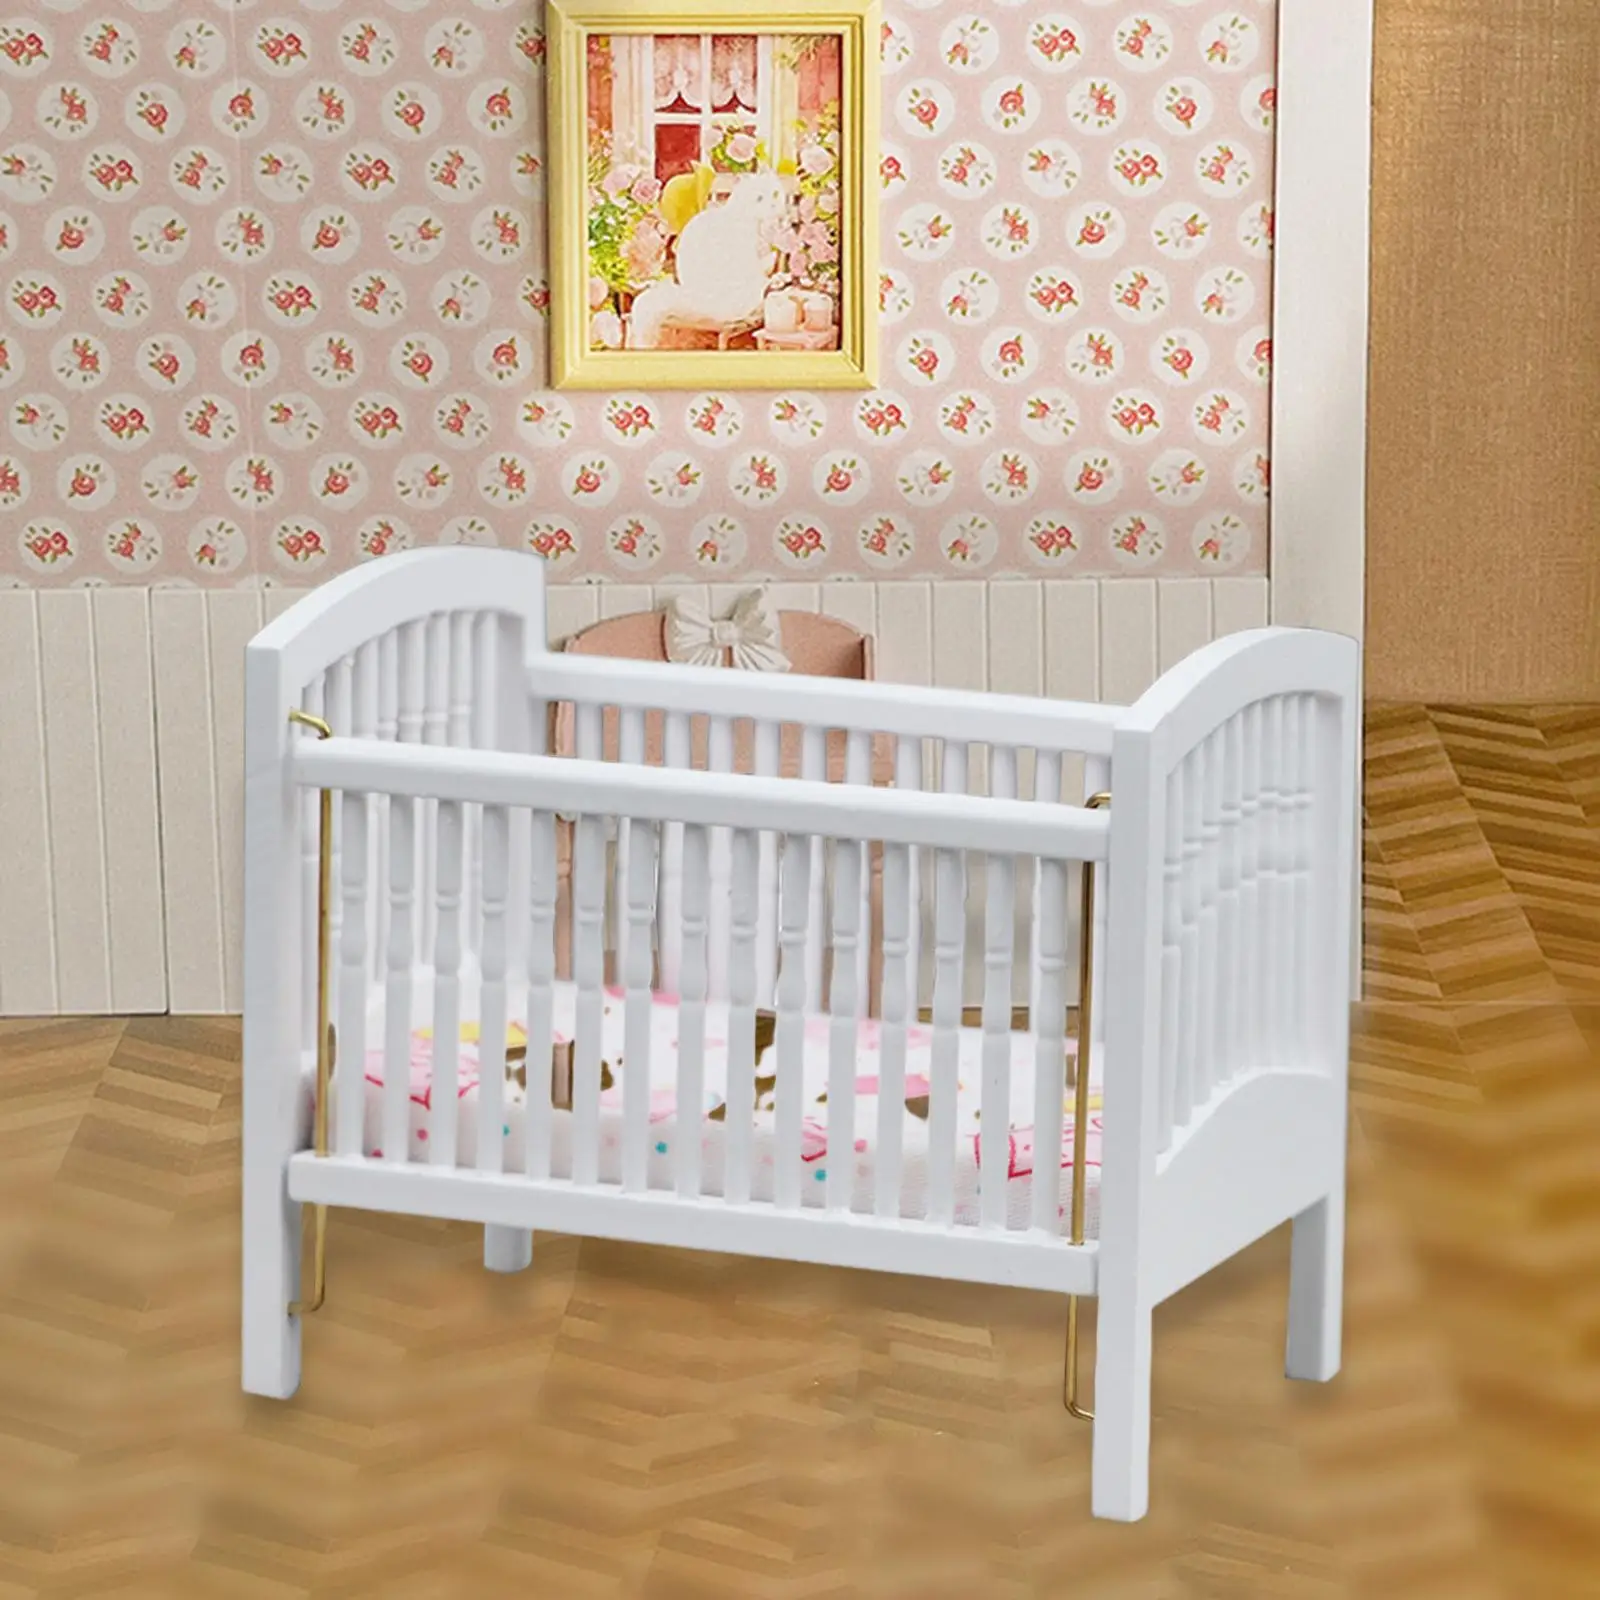 Simulation 1/12 Scale Miniature Crib with Mattress Bedroom Accessories Toy